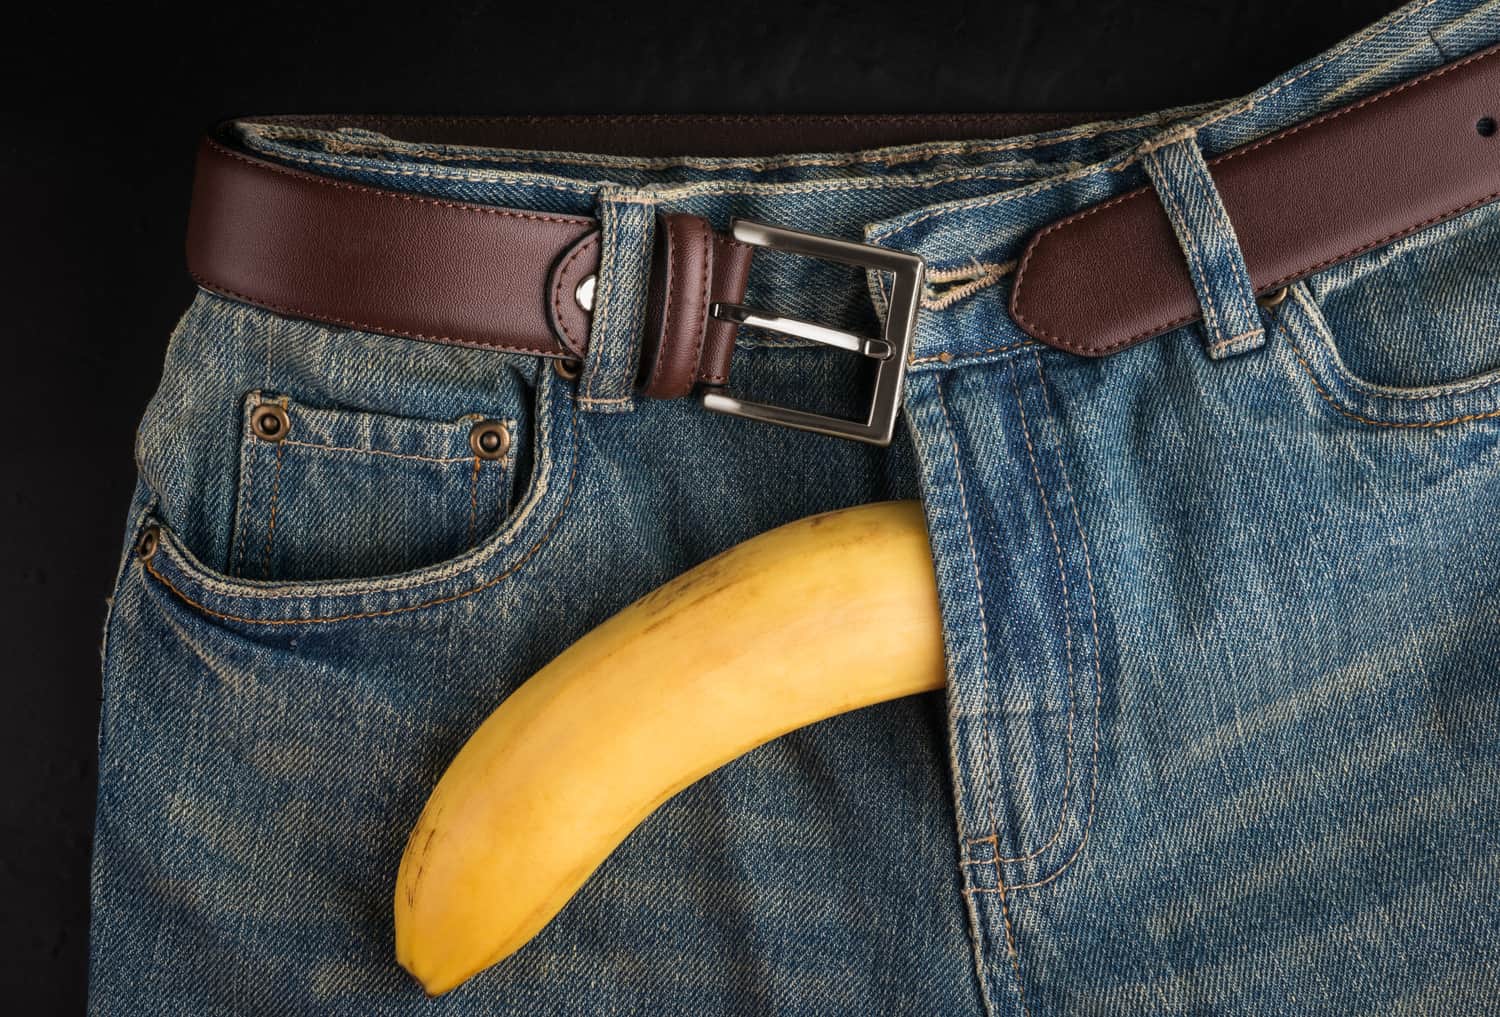 a banana is coming out of pants